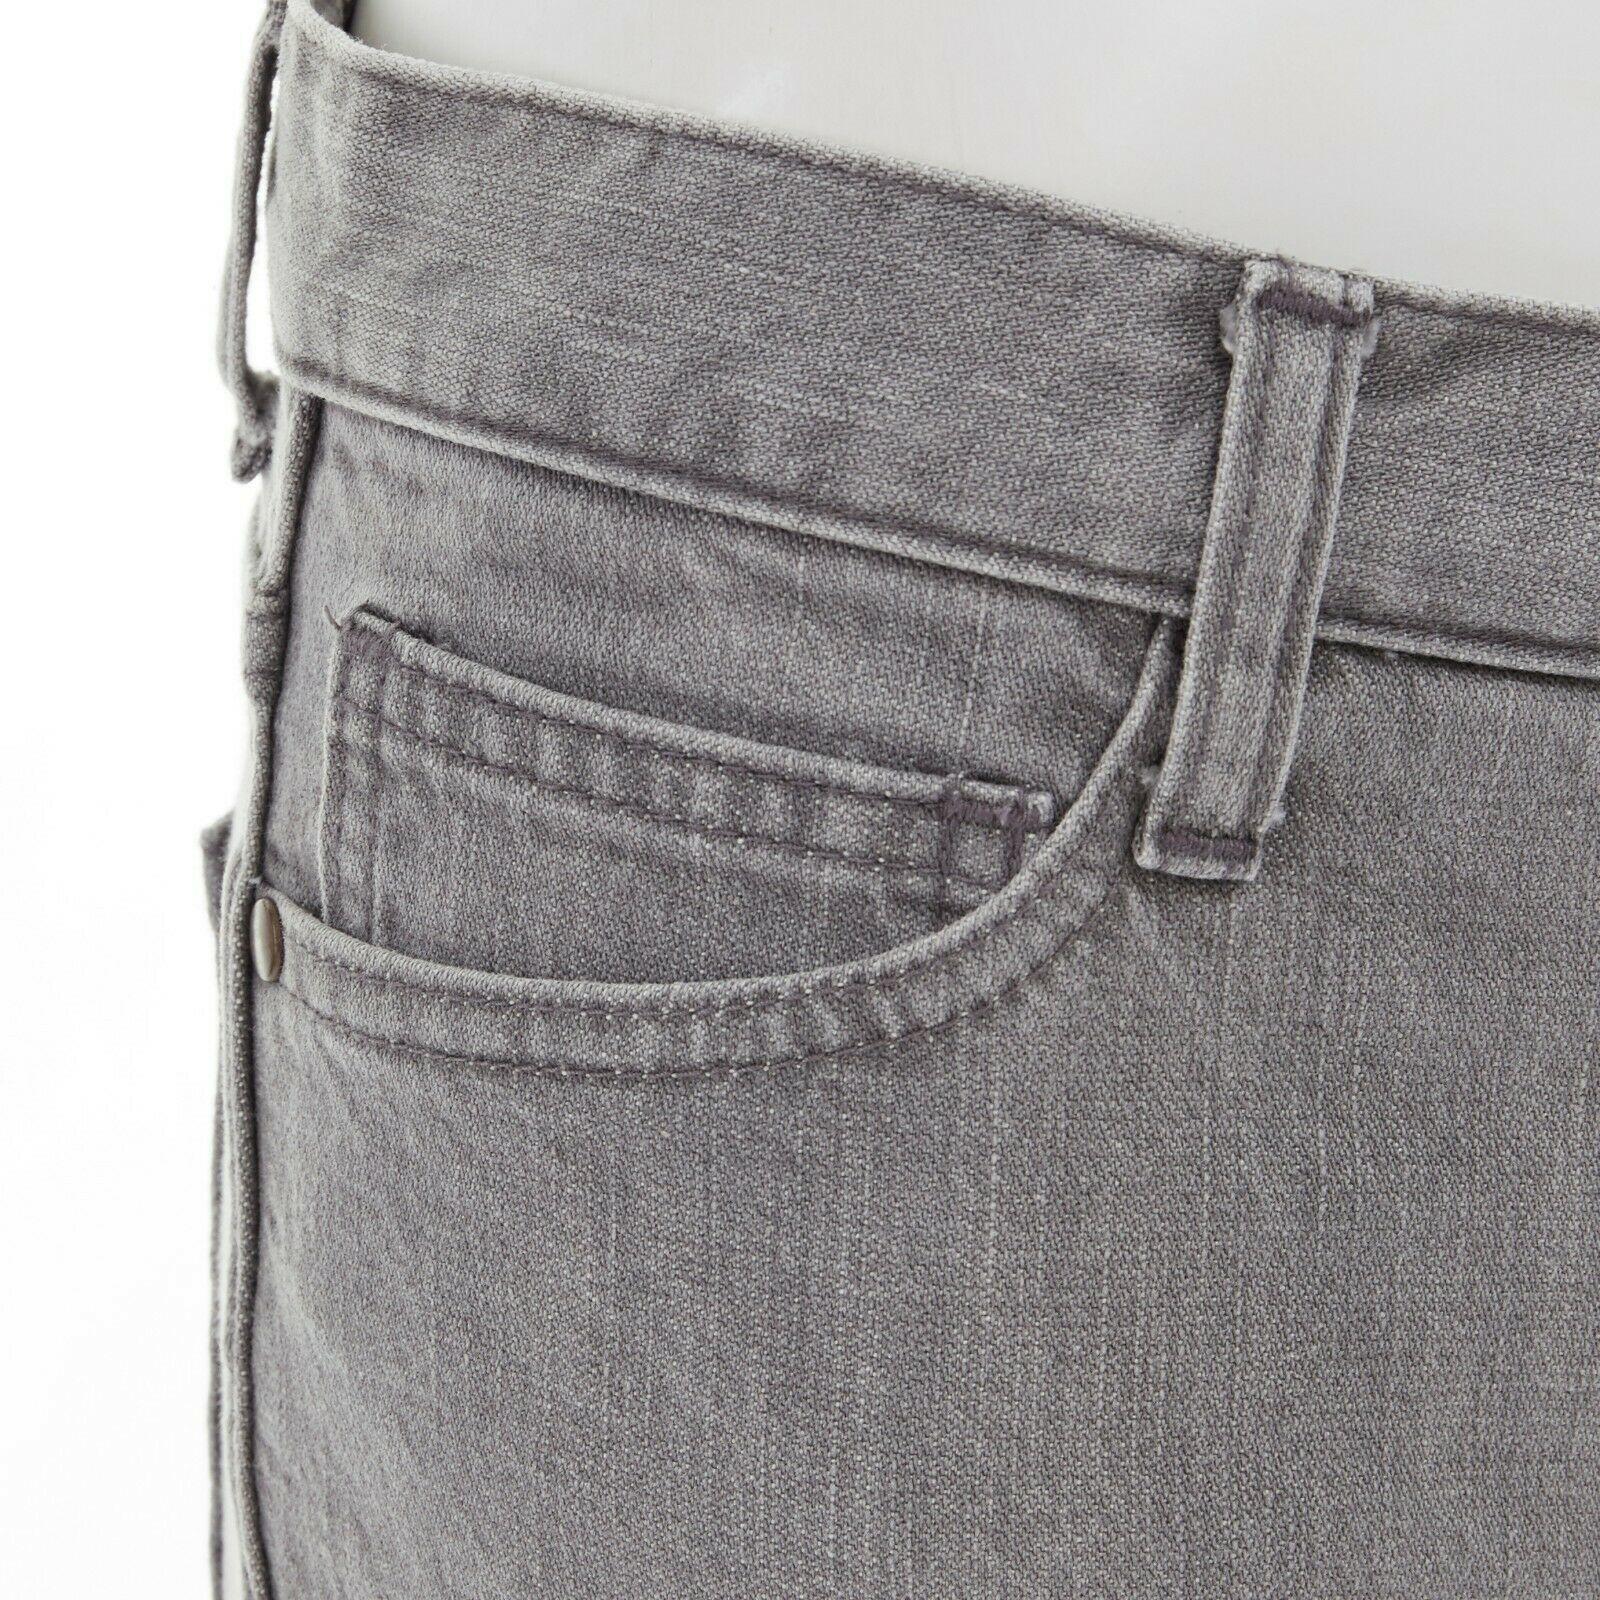 TOGA ARCHIVES light grey cotton denim zipped hem cropped skinny jeans JP1 
Reference: CAWG/A00162 
Brand: Toga Archives 
Material: Cotton 
Color: Grey 
Pattern: Solid 
Closure: Zip 
Extra Detail: 100% cotton. Light grey wash. Button fly closure.